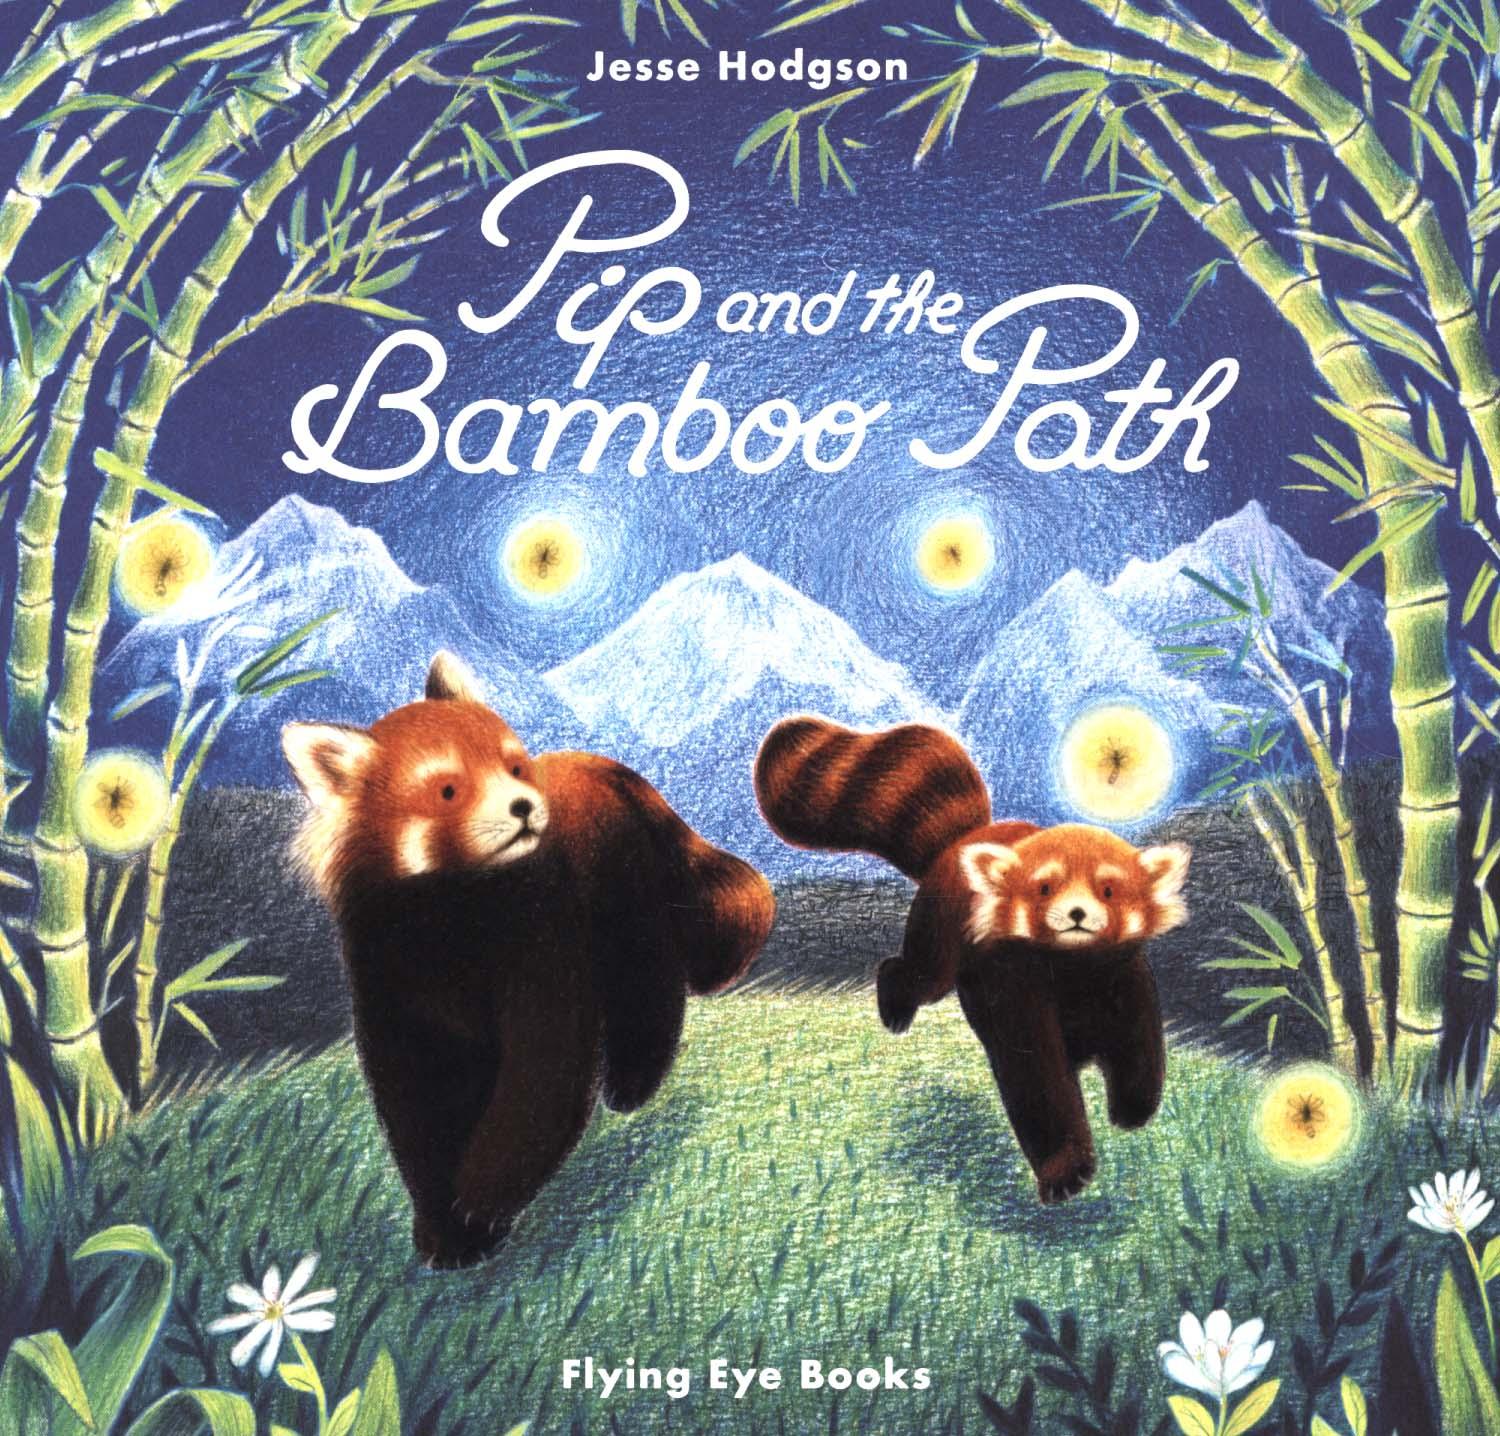 Pip and the Bamboo Path